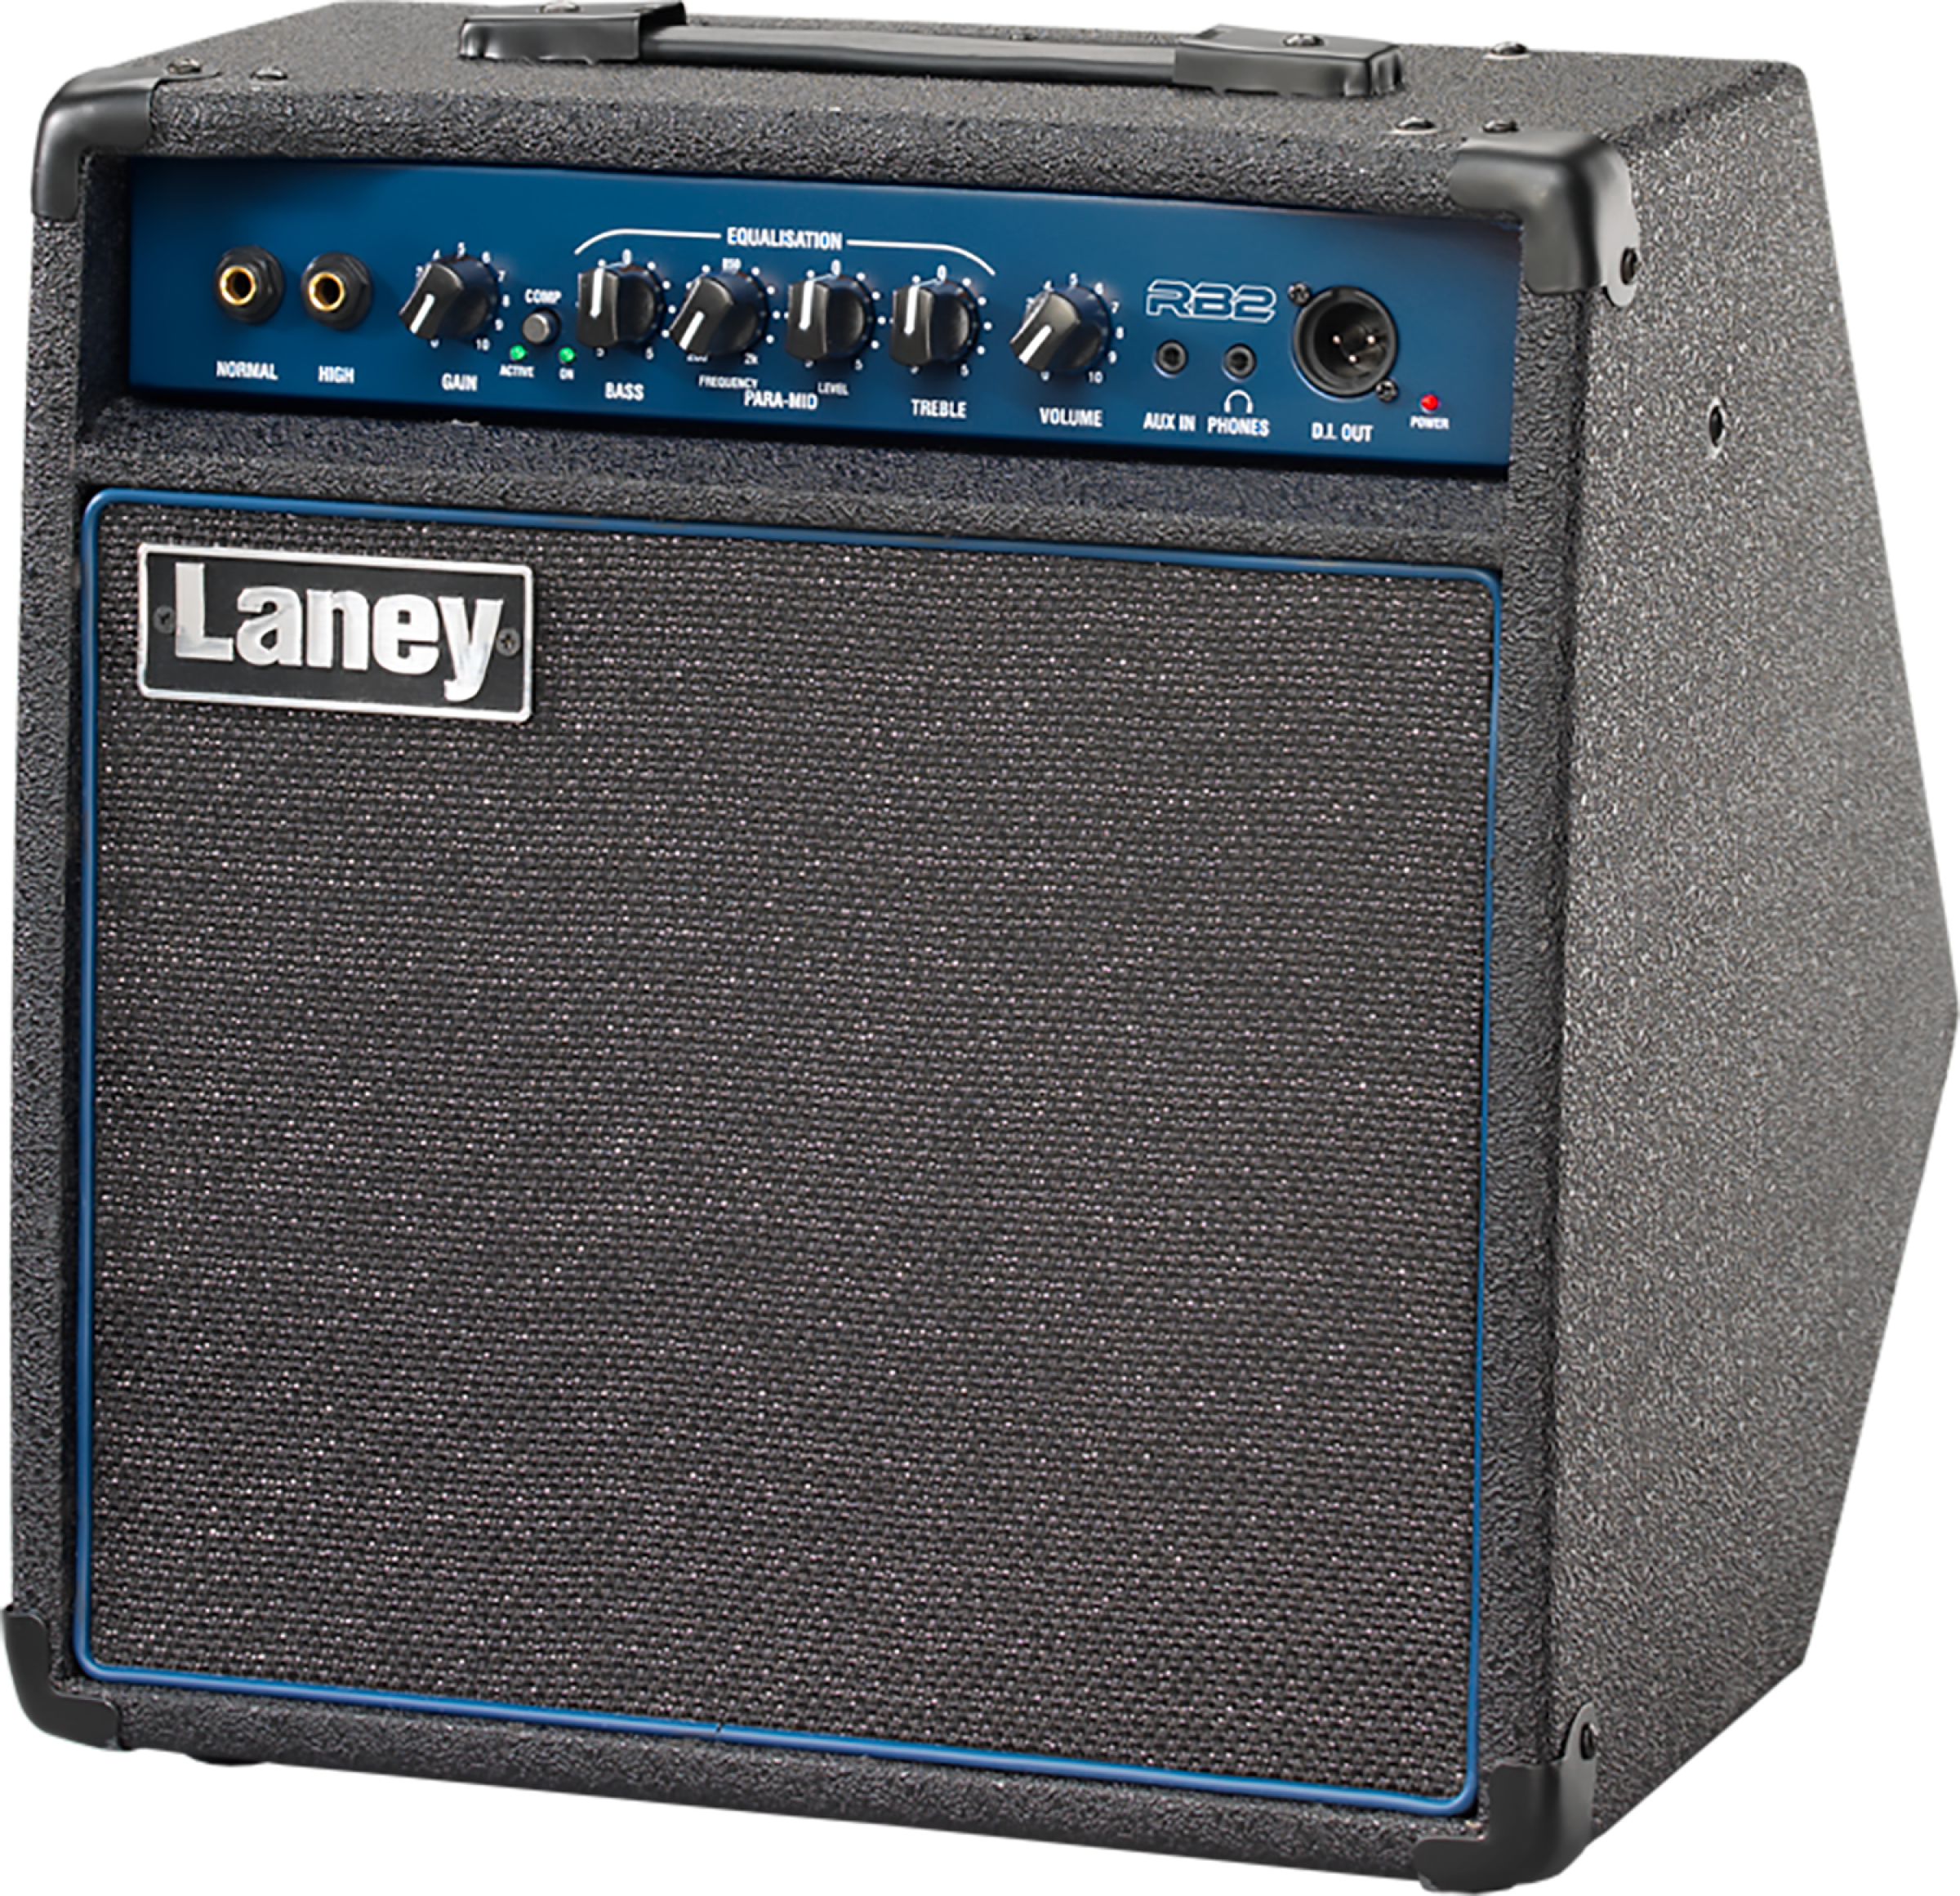 Laney Rb2 30w 1x10 - Combo voor basses - Variation 2